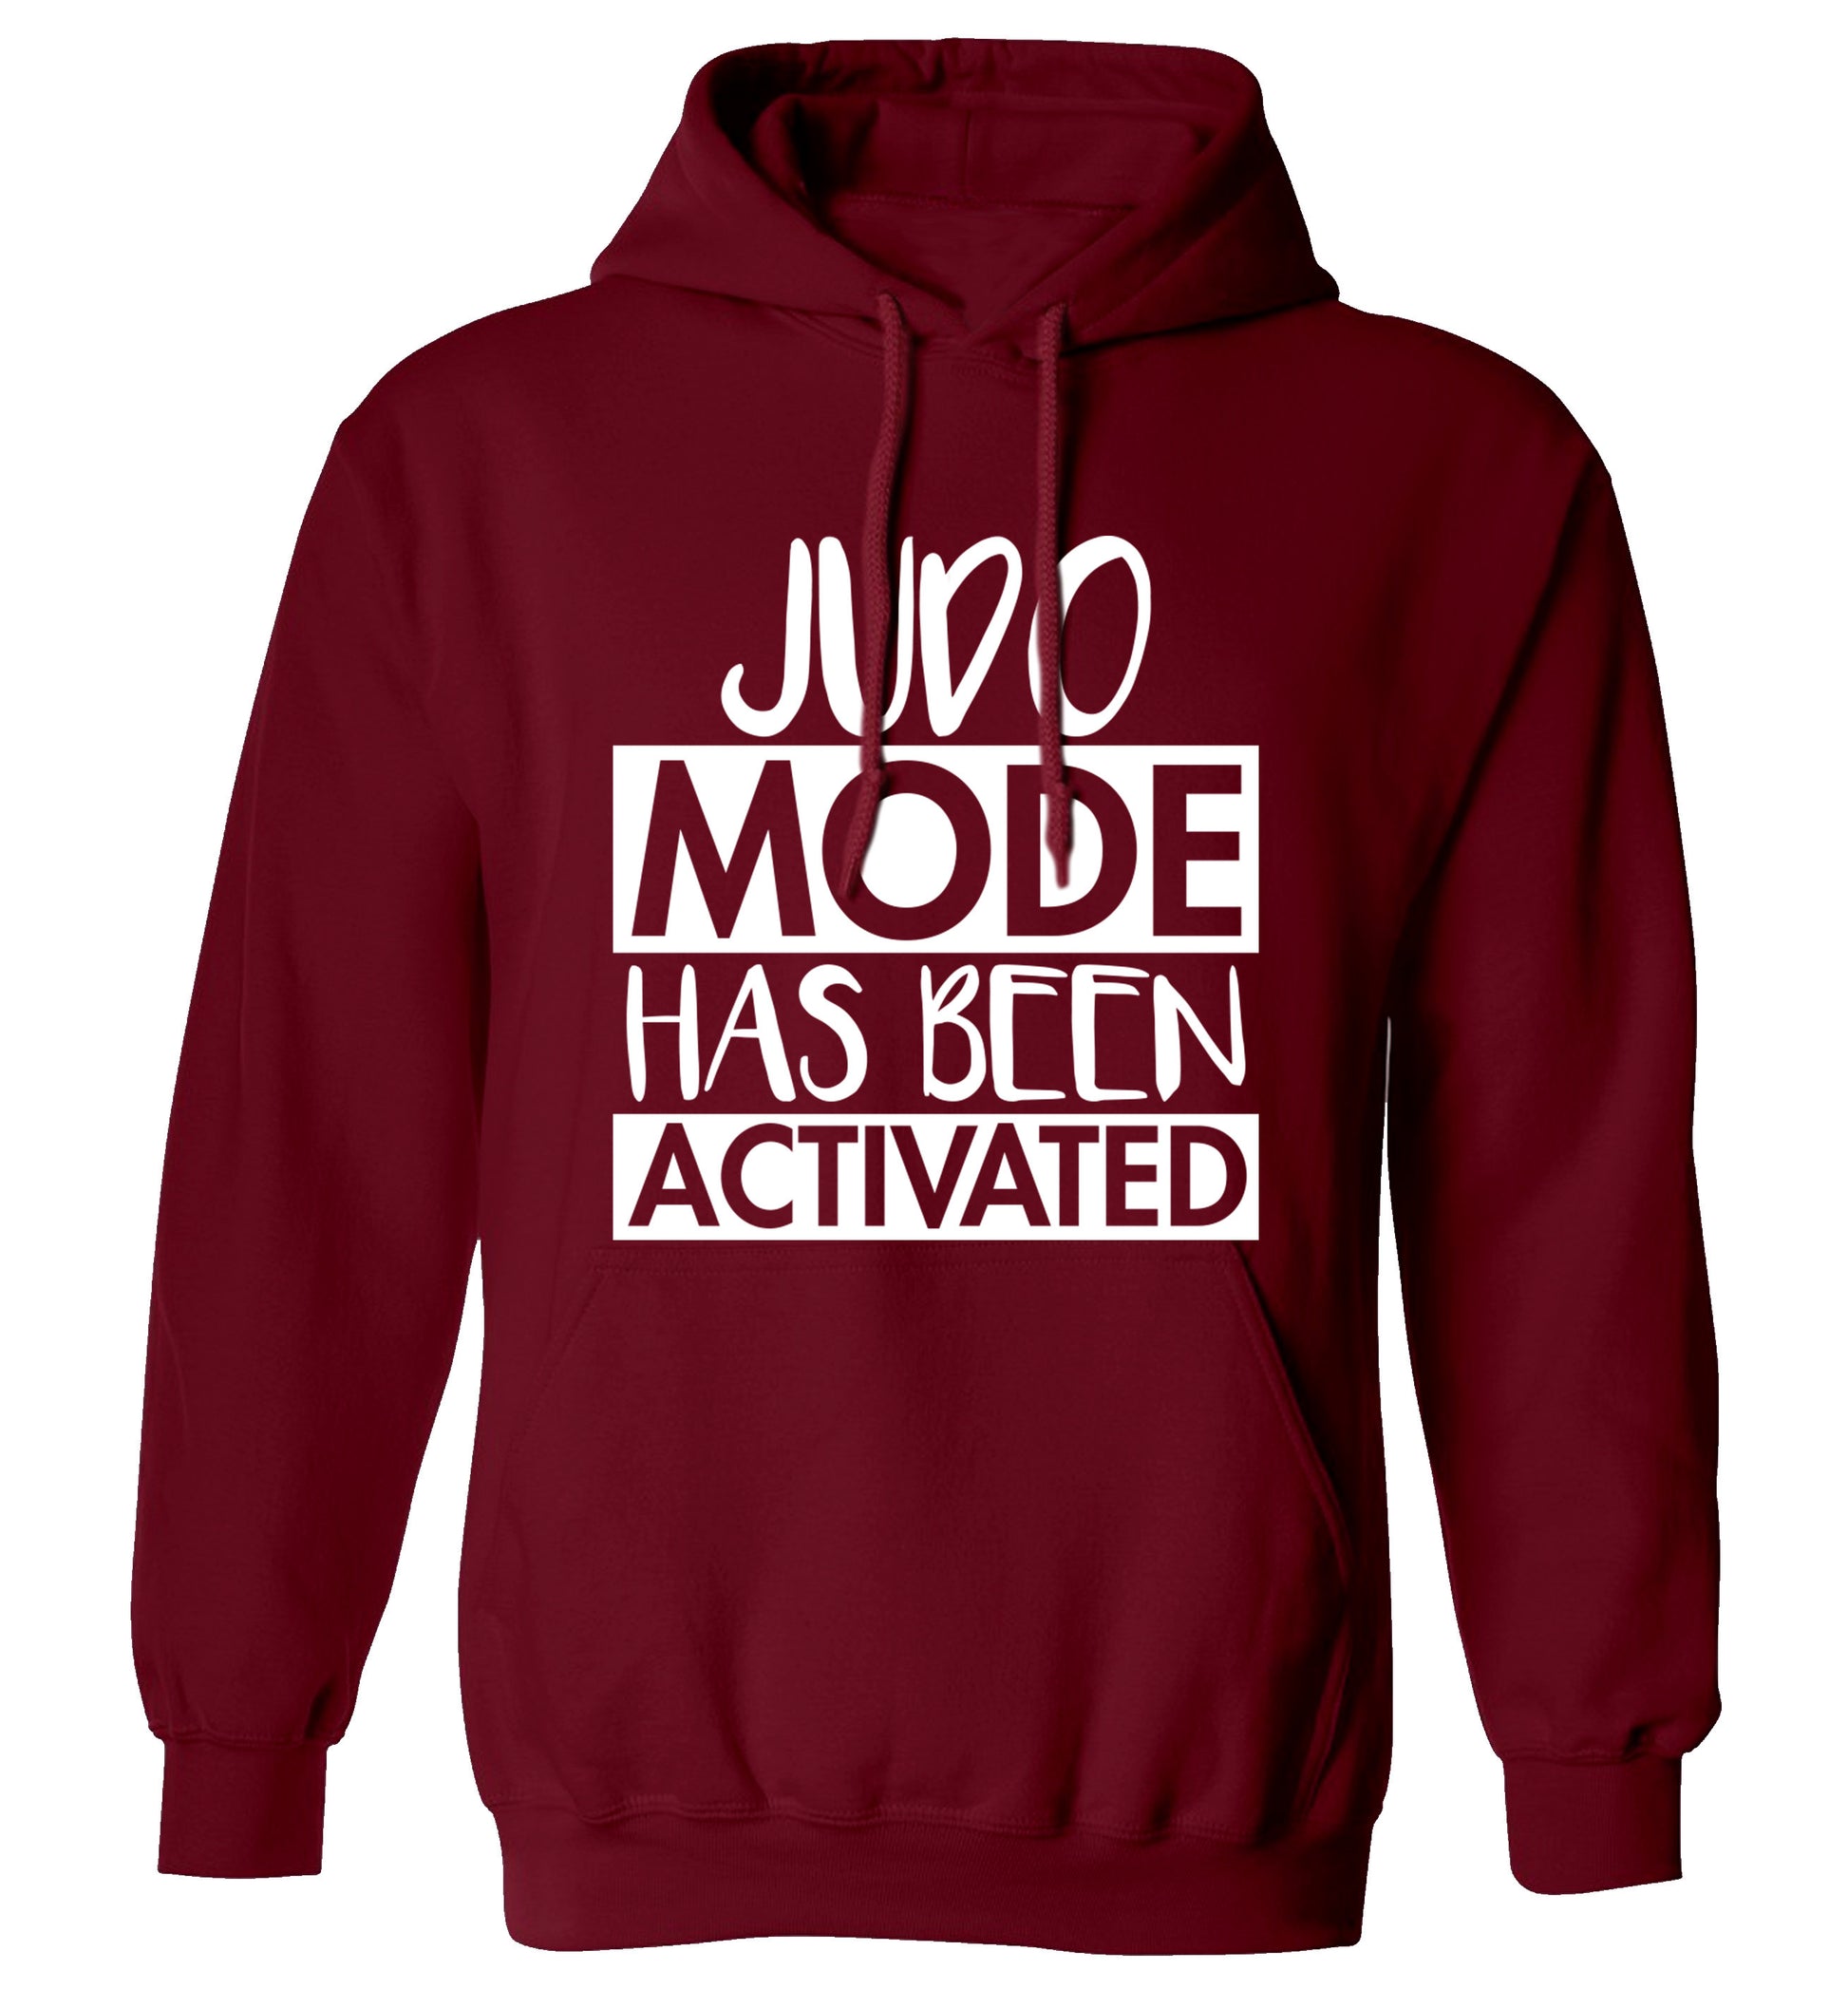 Judo mode activated adults unisex maroon hoodie 2XL